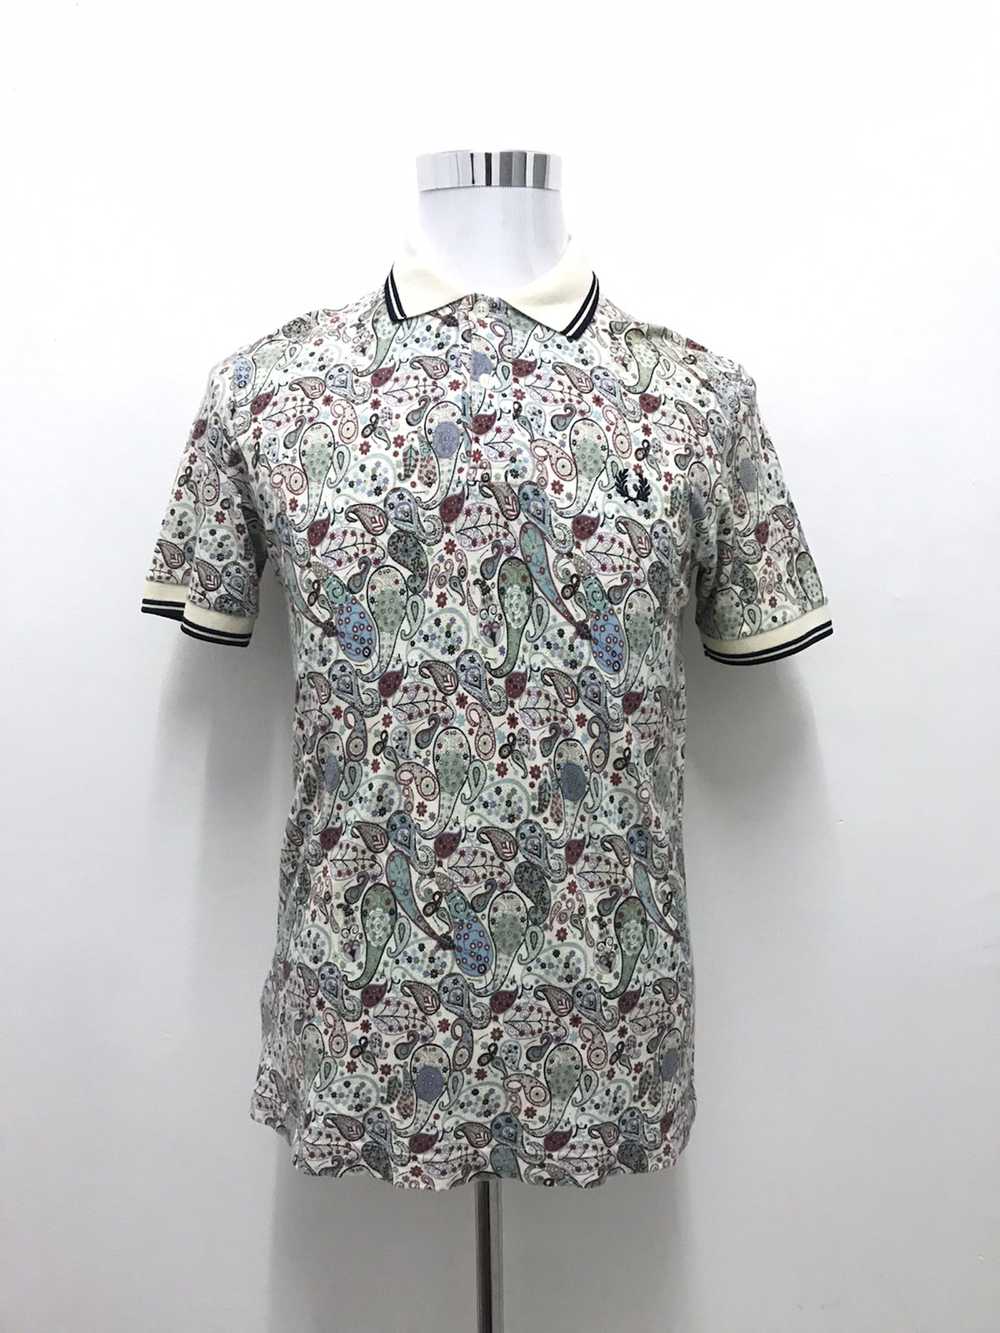 Fred Perry × Liberty Fred Perry x Liberty - image 1